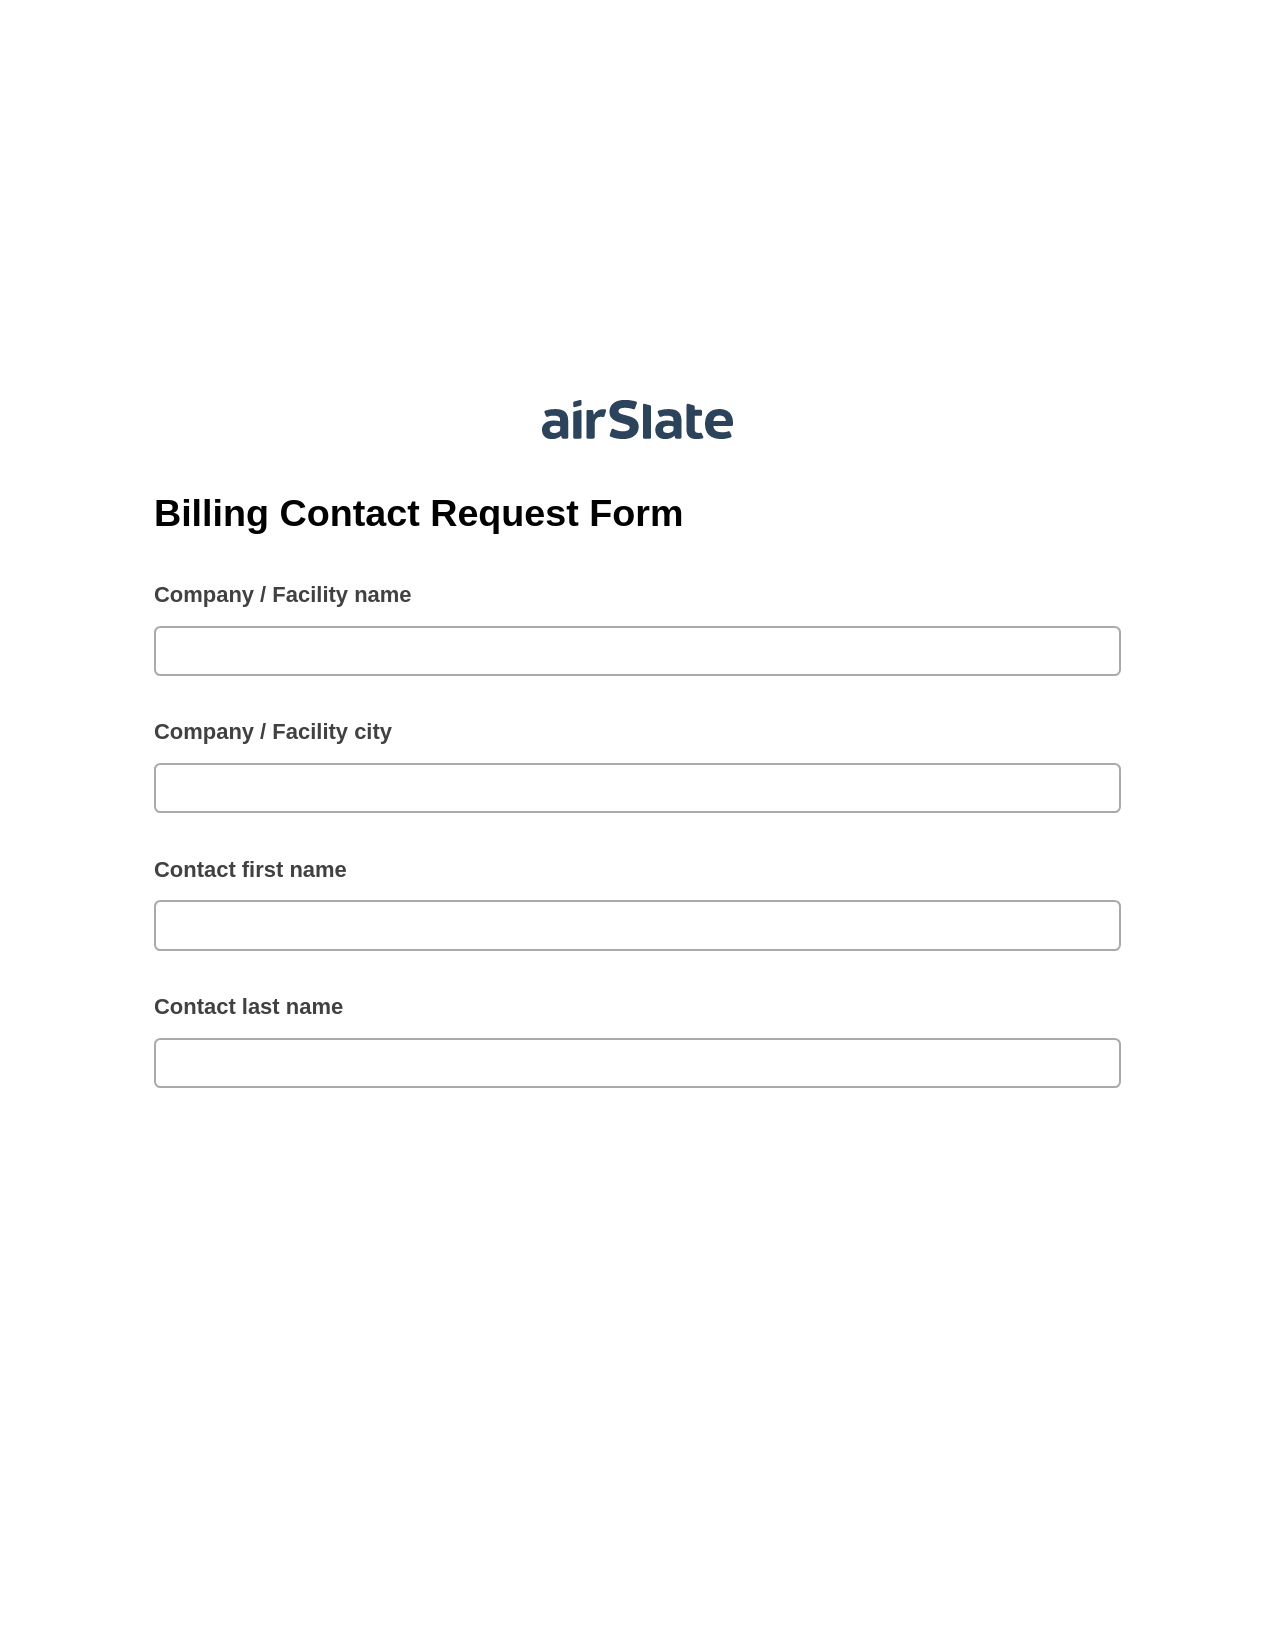 Multirole Billing Contact Request Form Pre-fill from Excel Spreadsheet Bot, Webhook Bot, Export to Formstack Documents Bot